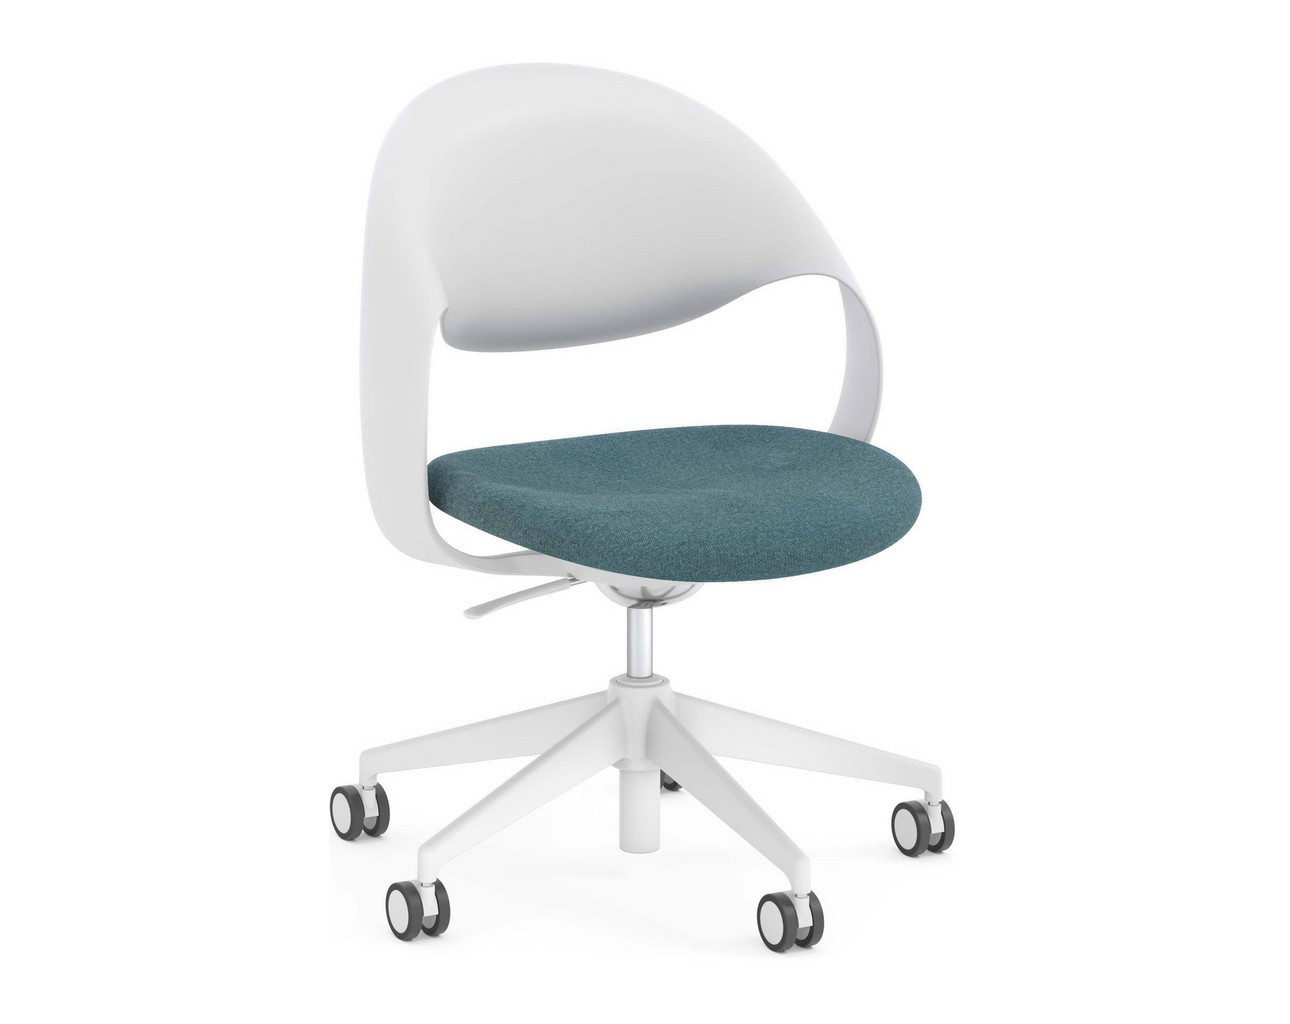 Loop Multi-Purpose Chair – White Frame with Teal Seat